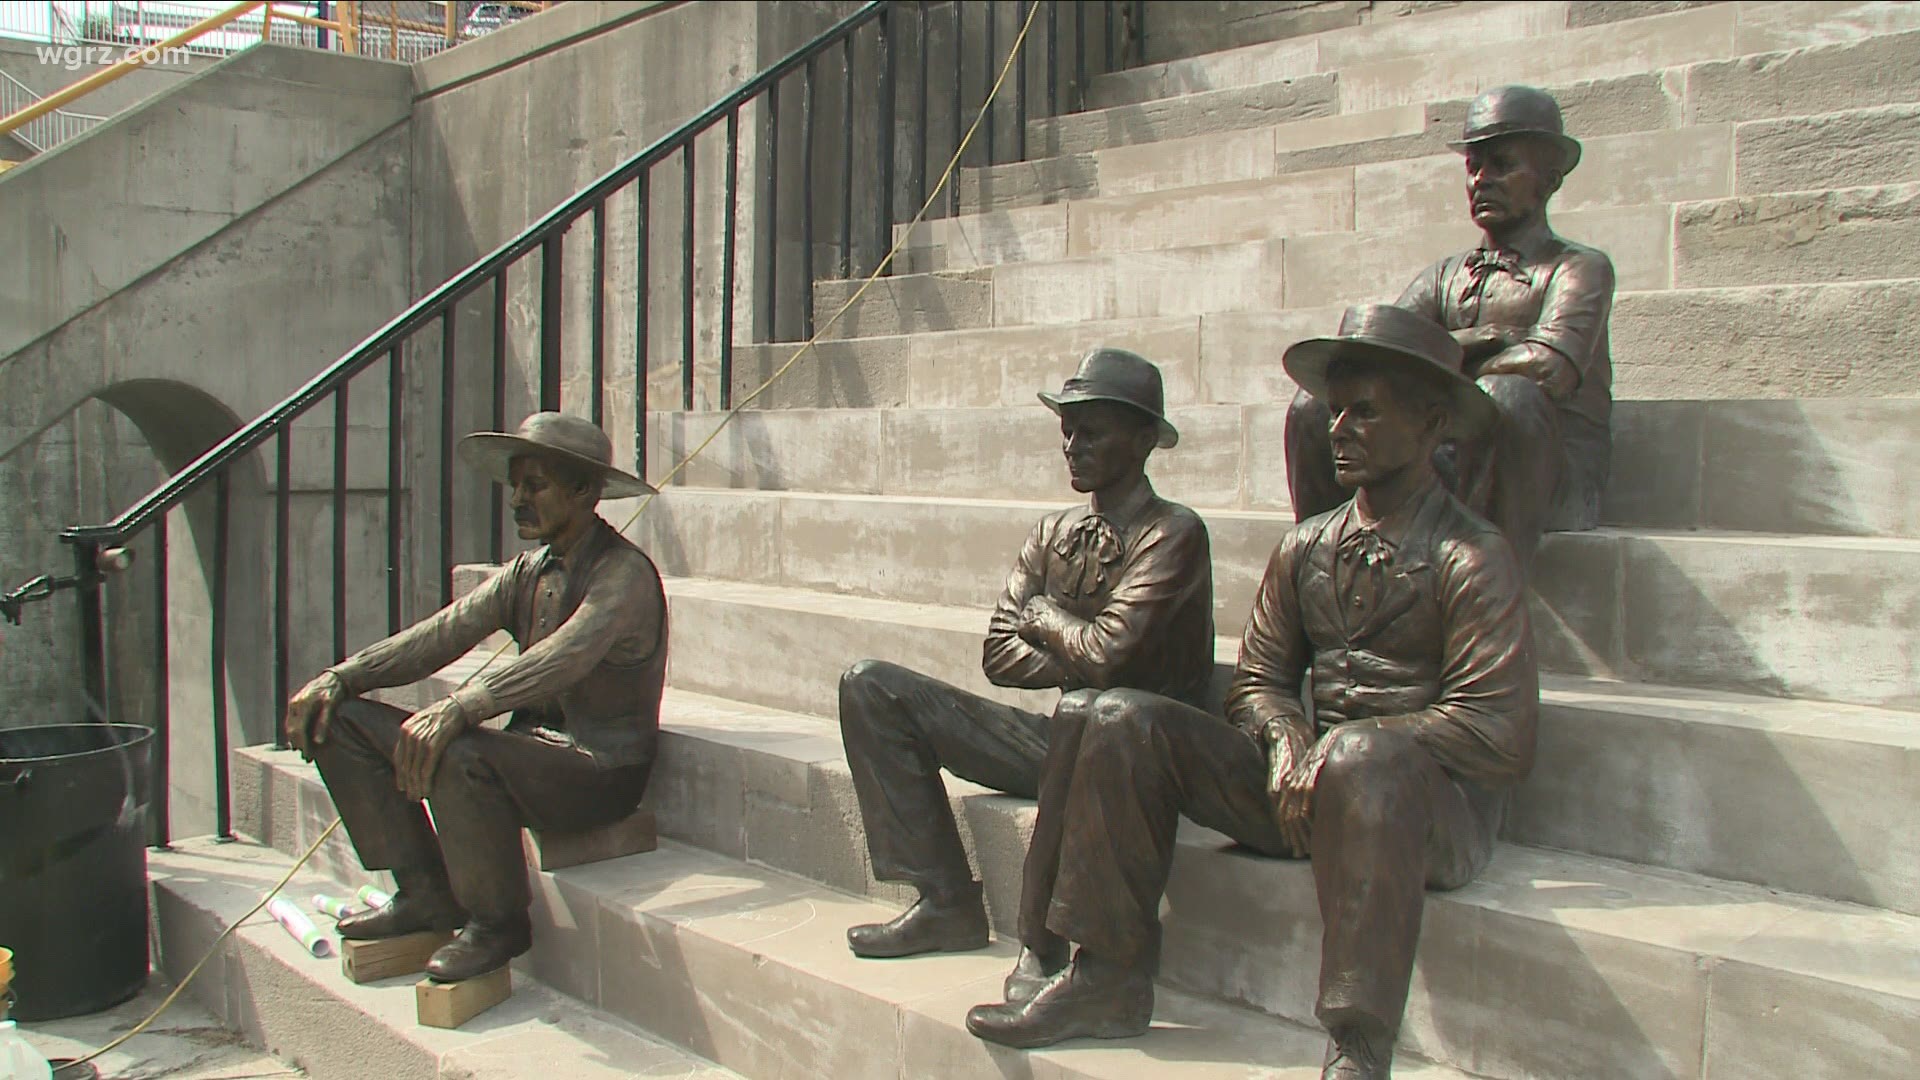 In Lockport, the next five sculptures in the Lock Tenders Tribute Monument will be dedicated Saturday morning in the lockport locks.